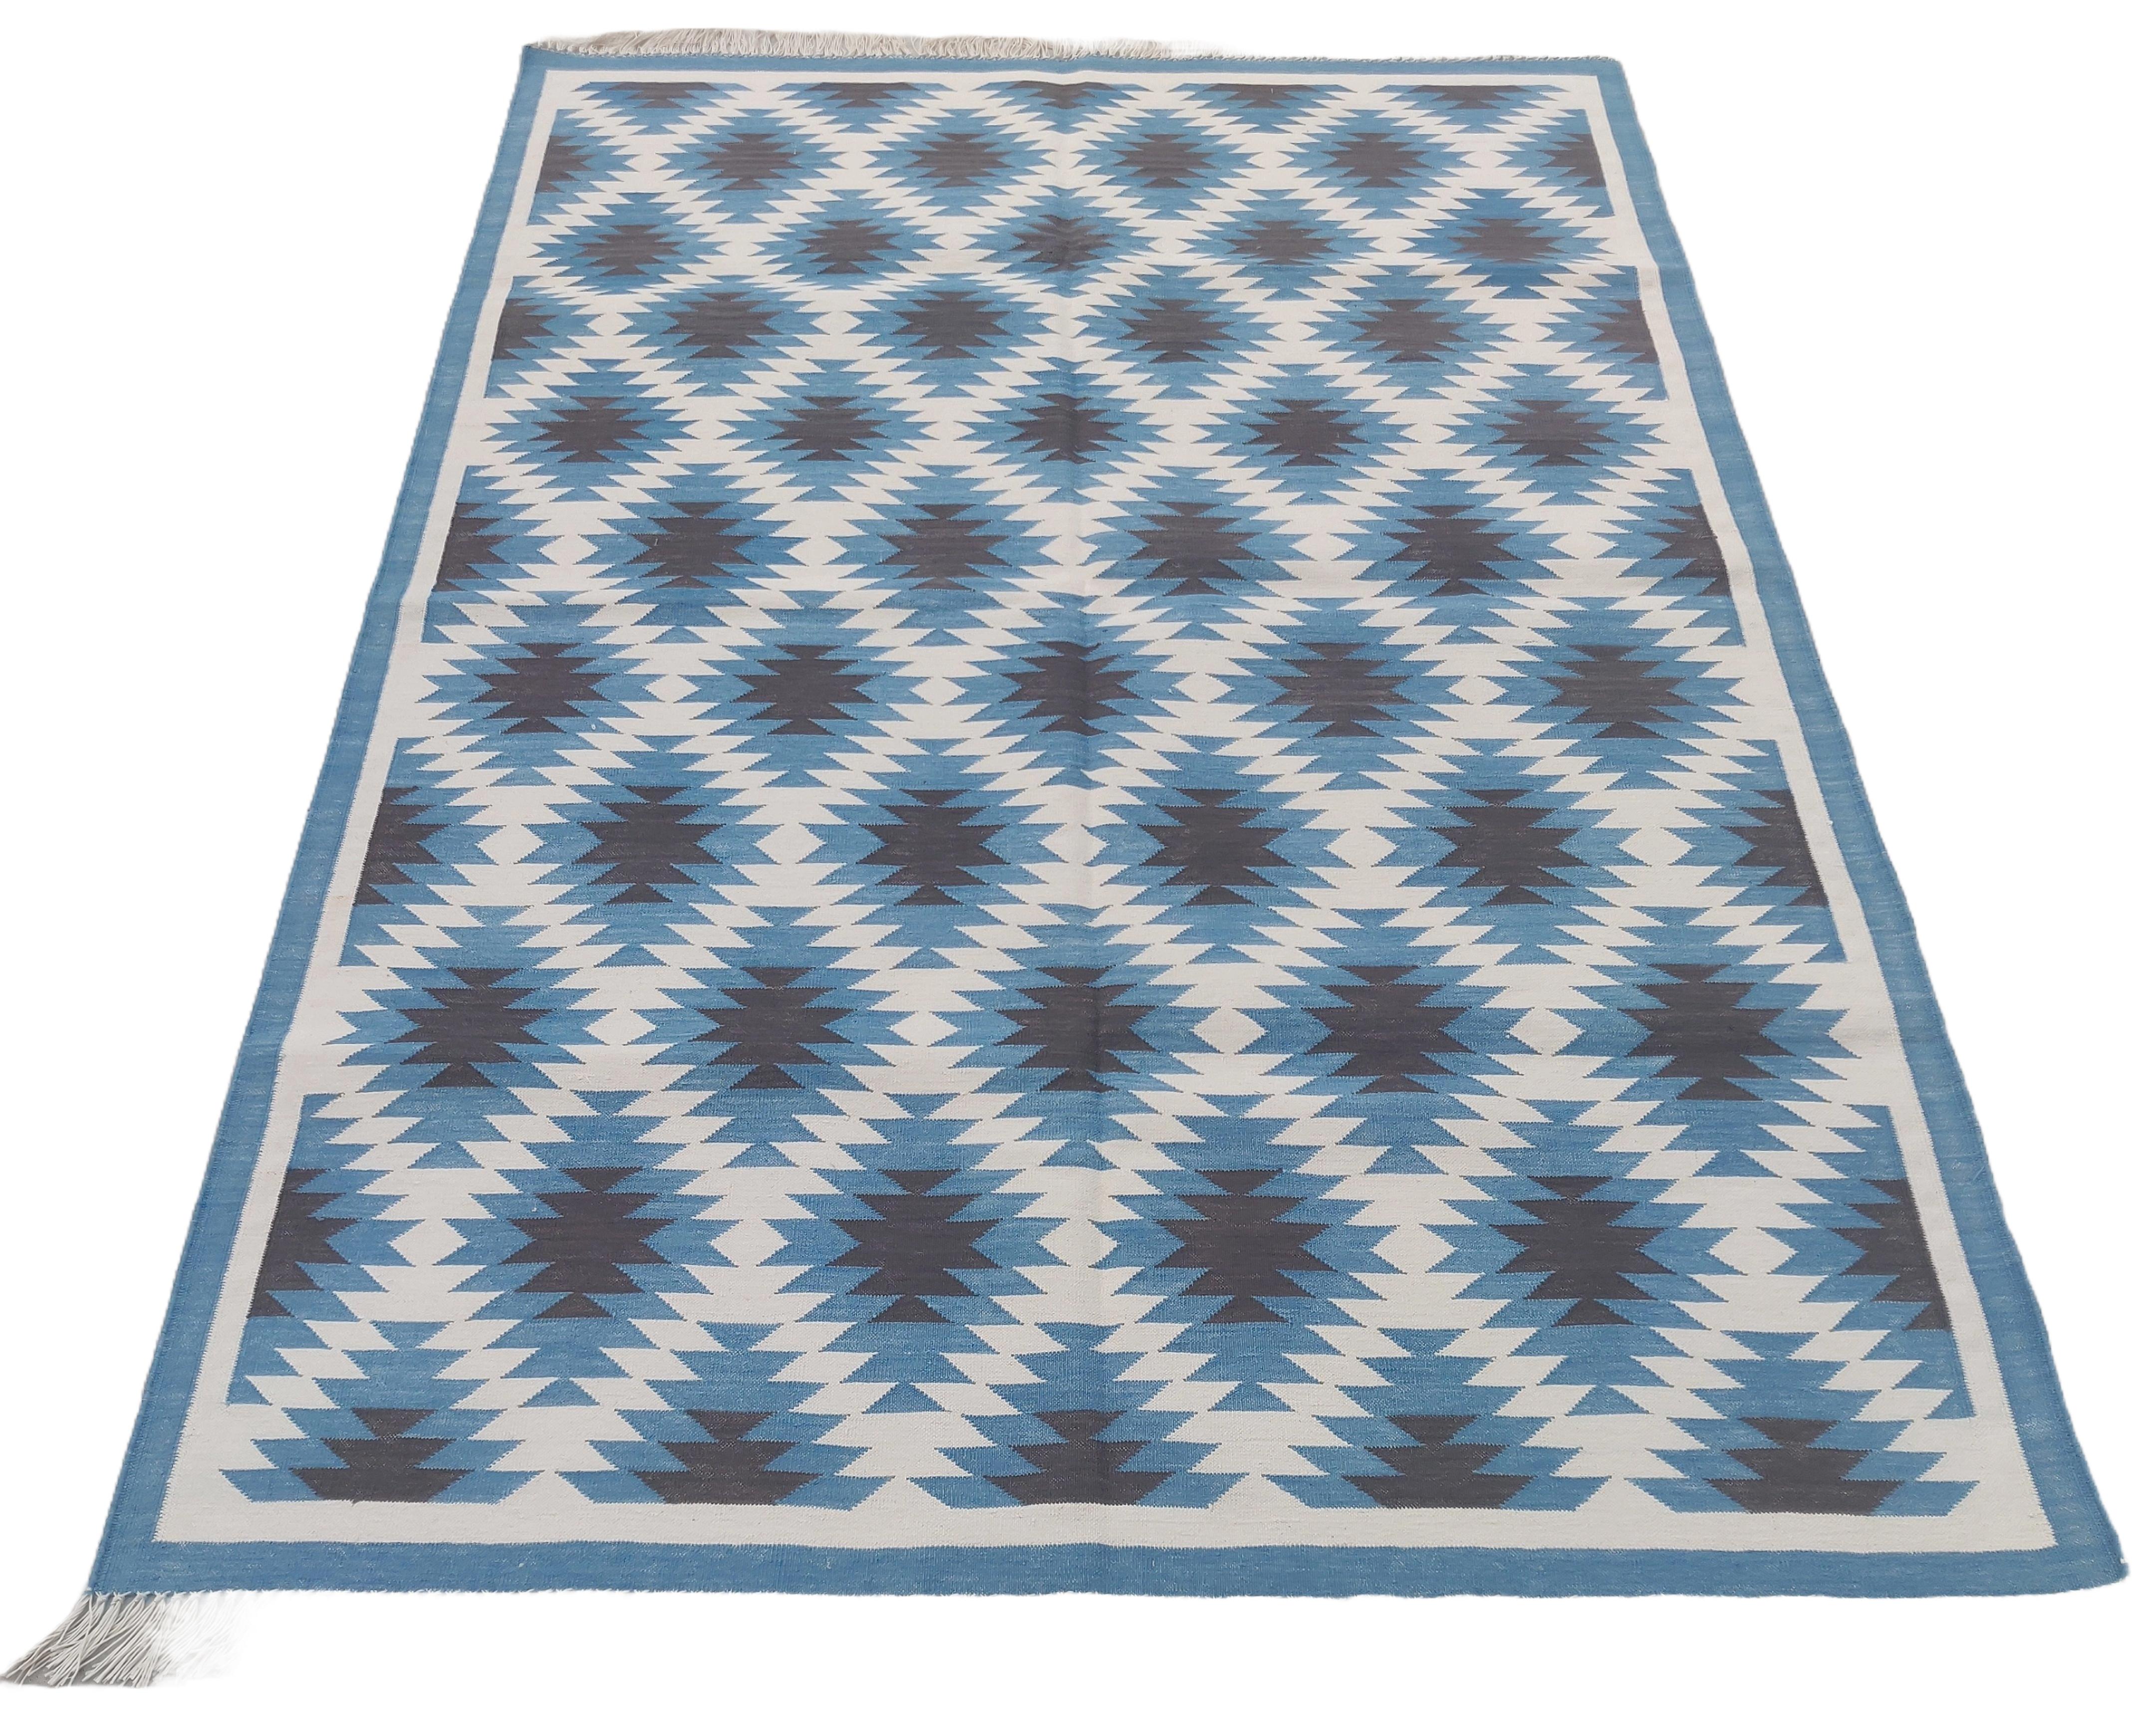 Hand-Woven Handmade Cotton Area Flat Weave Rug, 4x6 Blue And White Geometric Indian Dhurrie For Sale